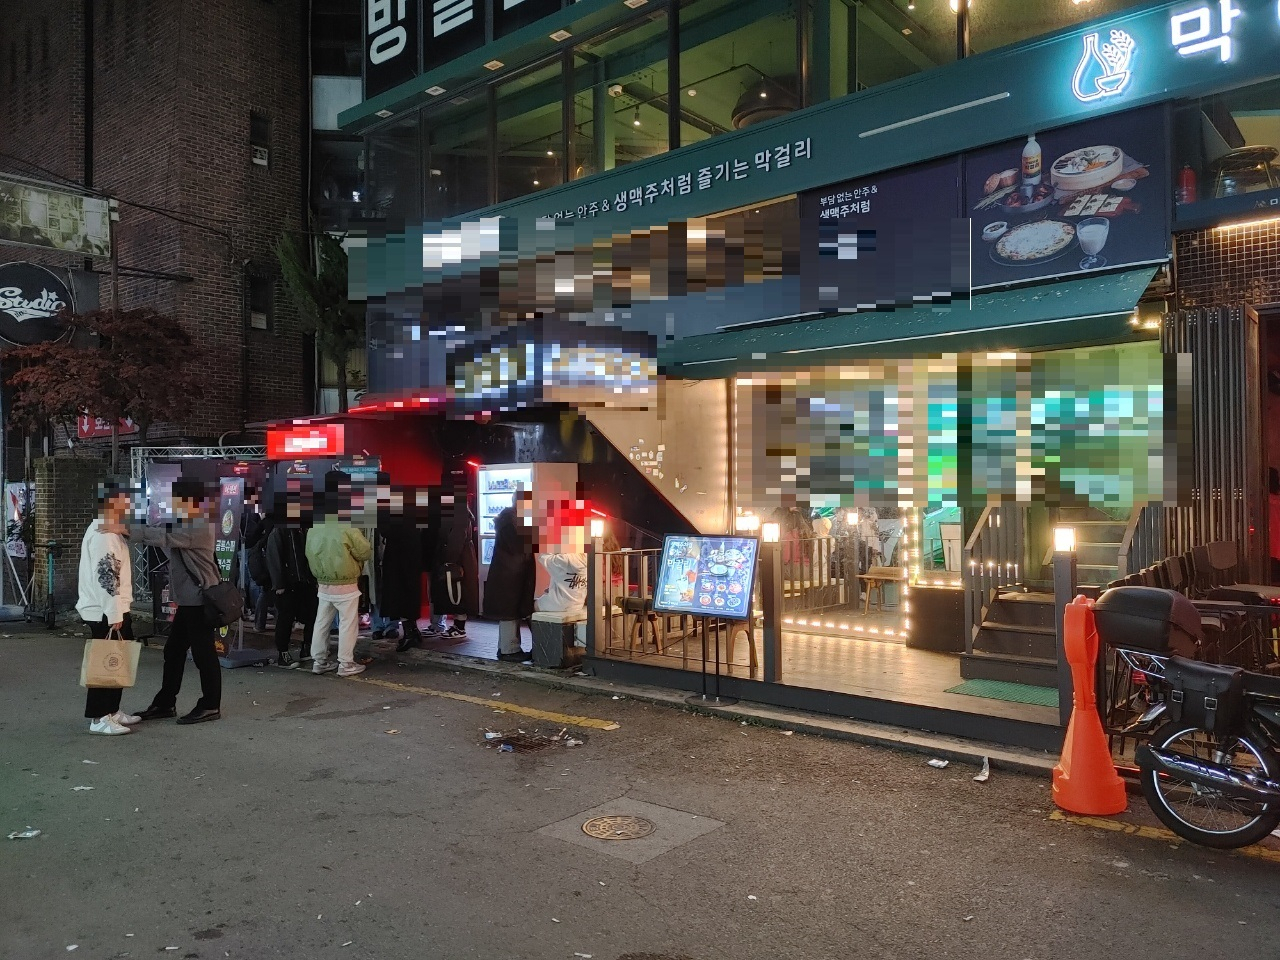 This photo is not directly related to the story. This file photo shows clubbers waiting in line to get in a club in the Hongdae area, western Seoul (Lee Si-jin/The Korea Herald)